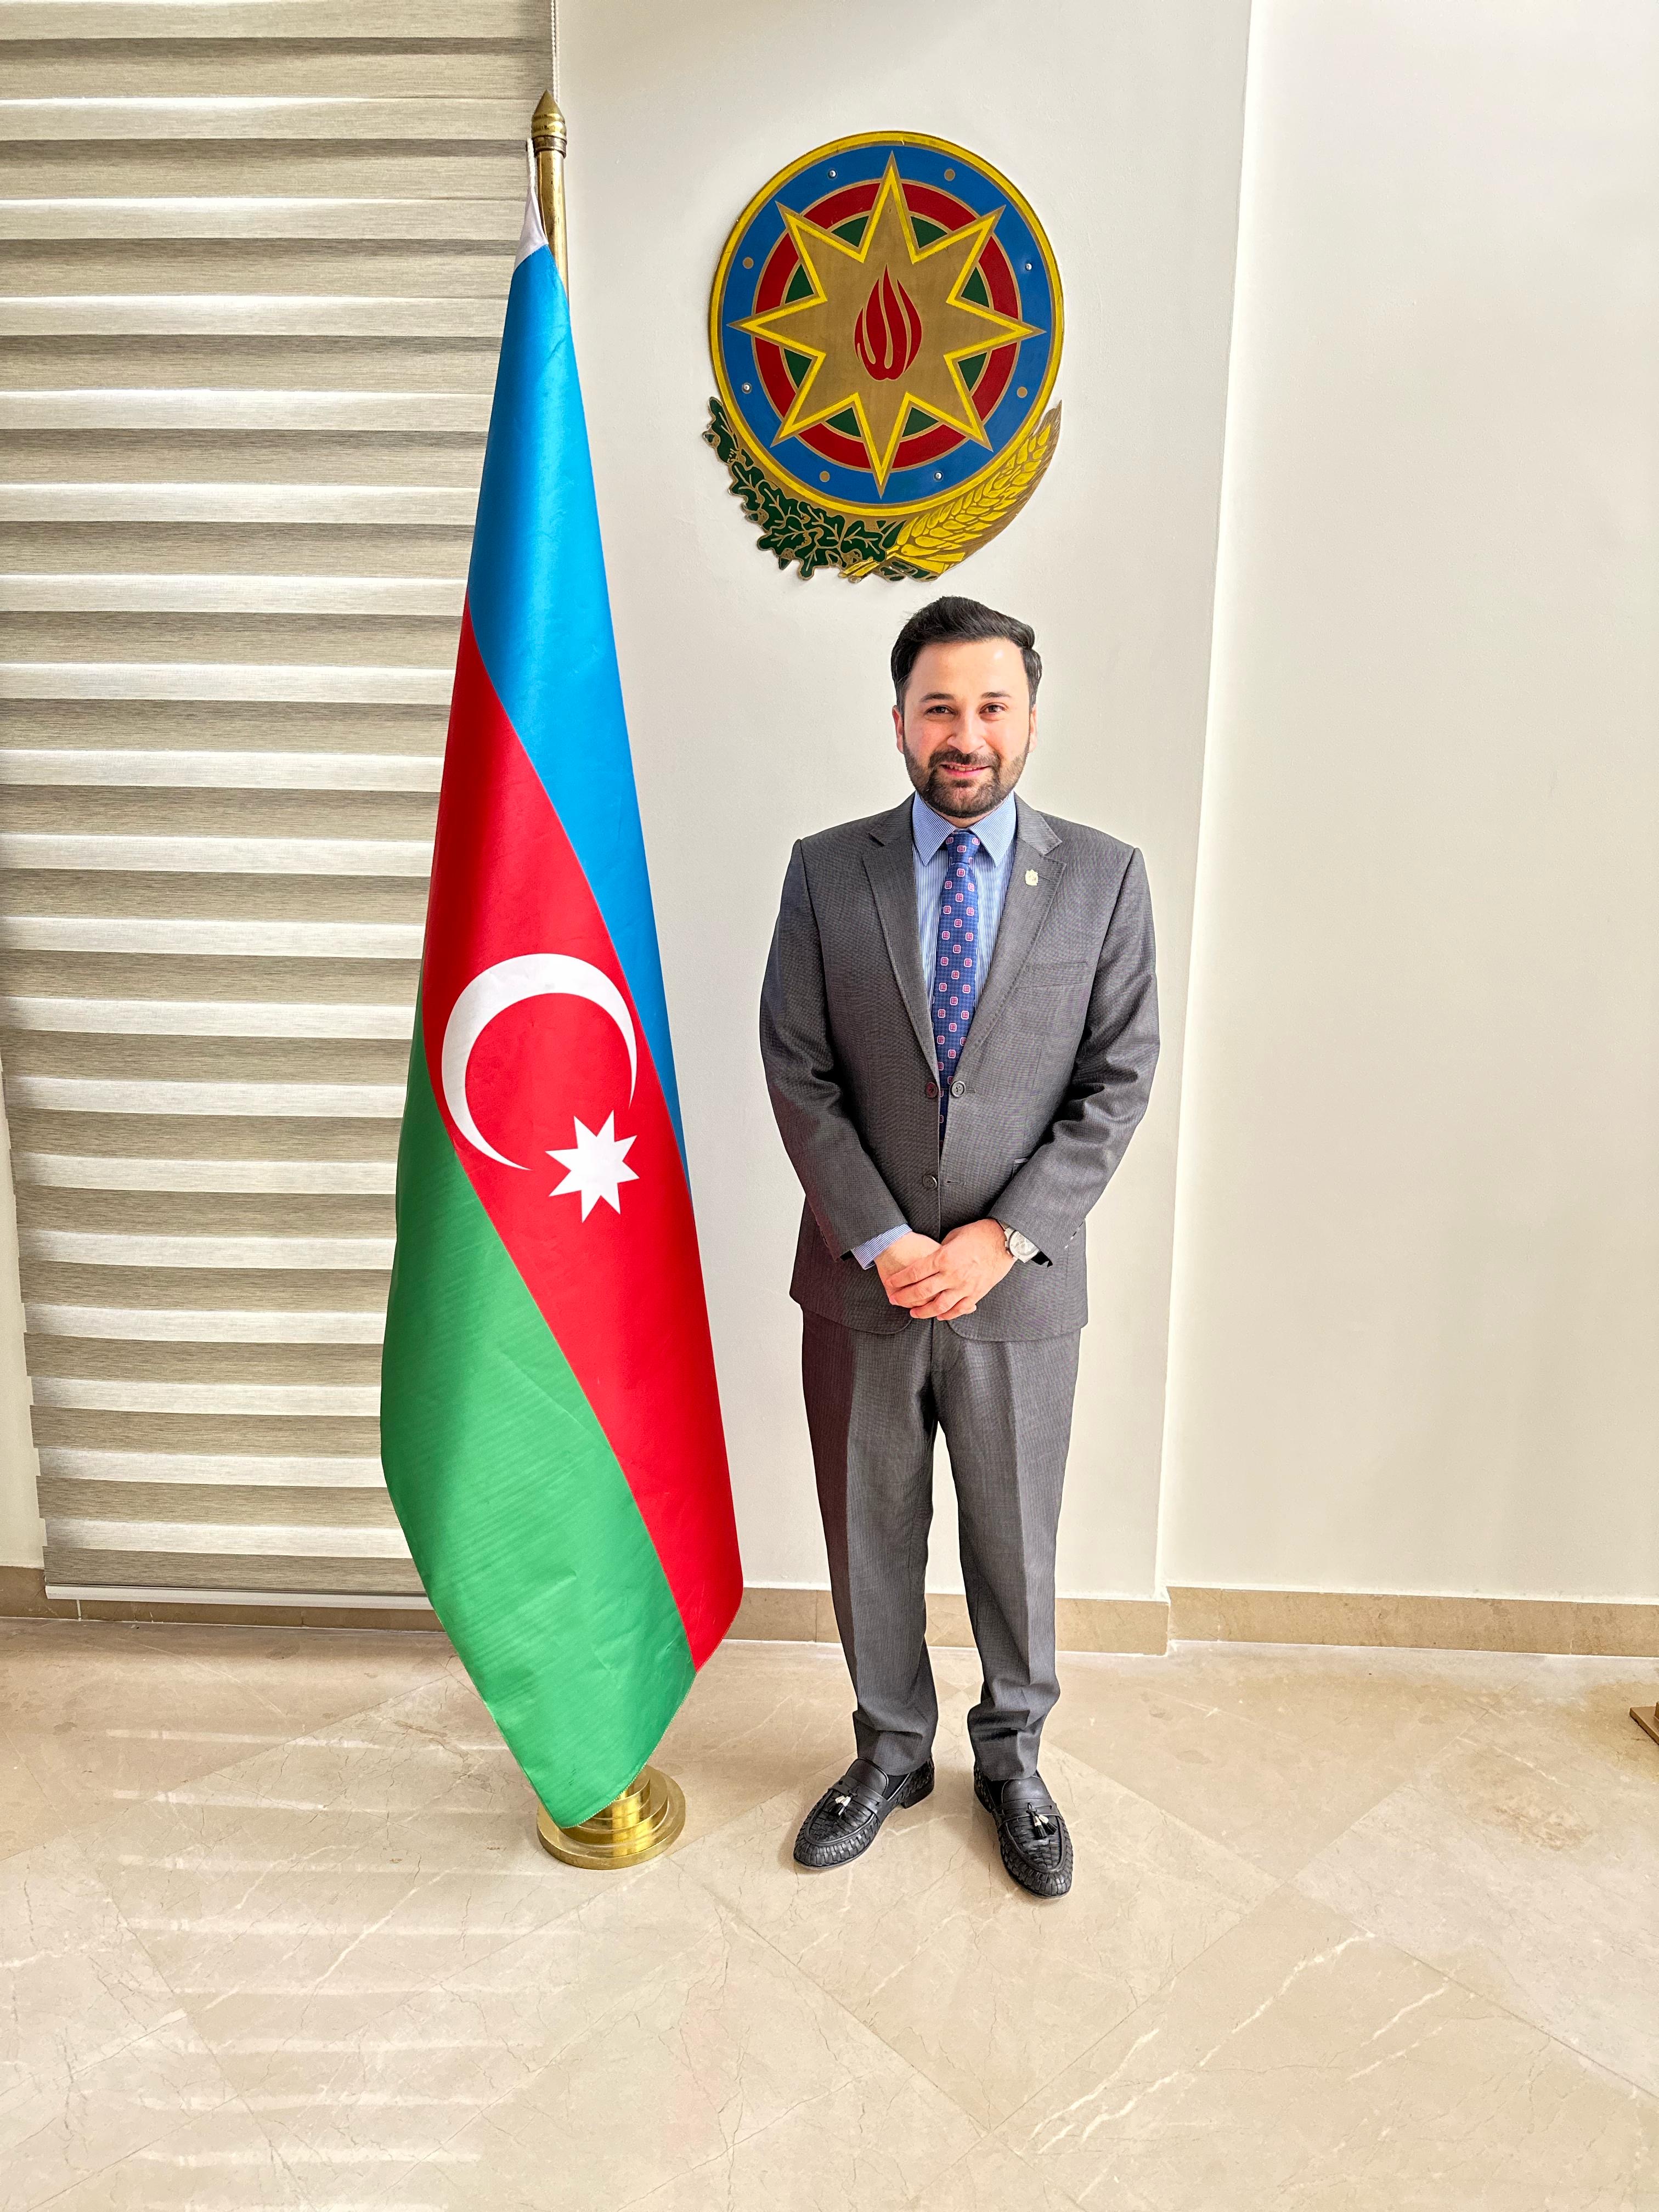 "Modern Azerbaijan is a glorious nation, standing prominently on the global stage” - Qaiser Nawab on 28 May